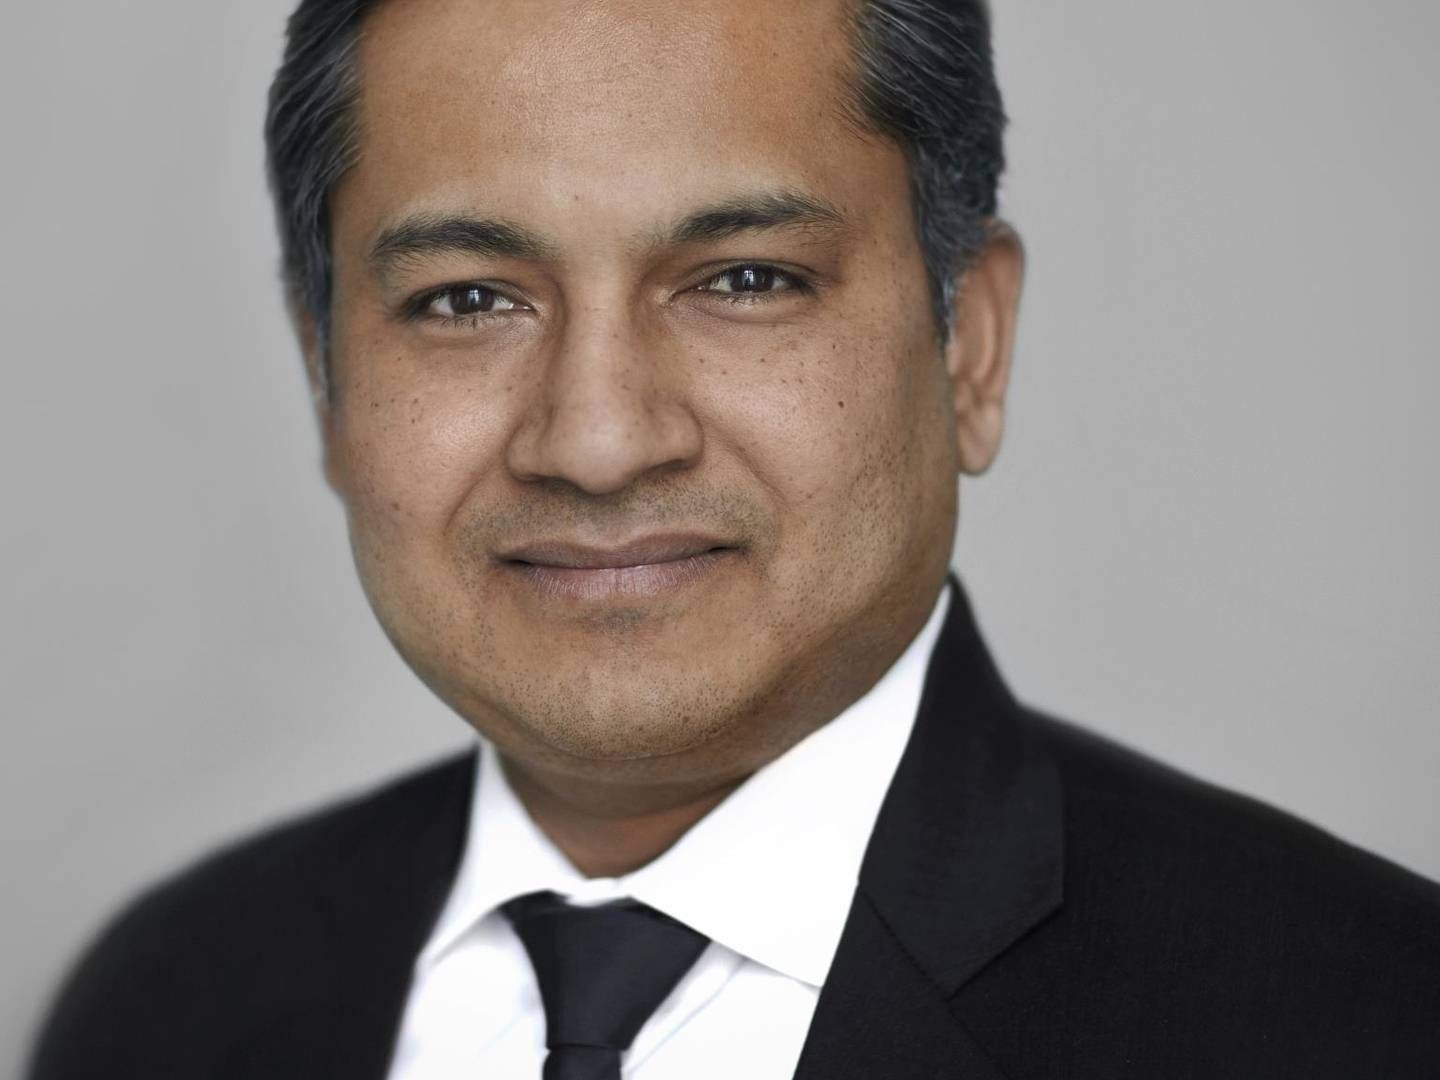 Maersk Tankers is working to attract more women, explains CHRO Prakash Thangachan to ShippingWatch. | Photo: PR / Maersk Tankers